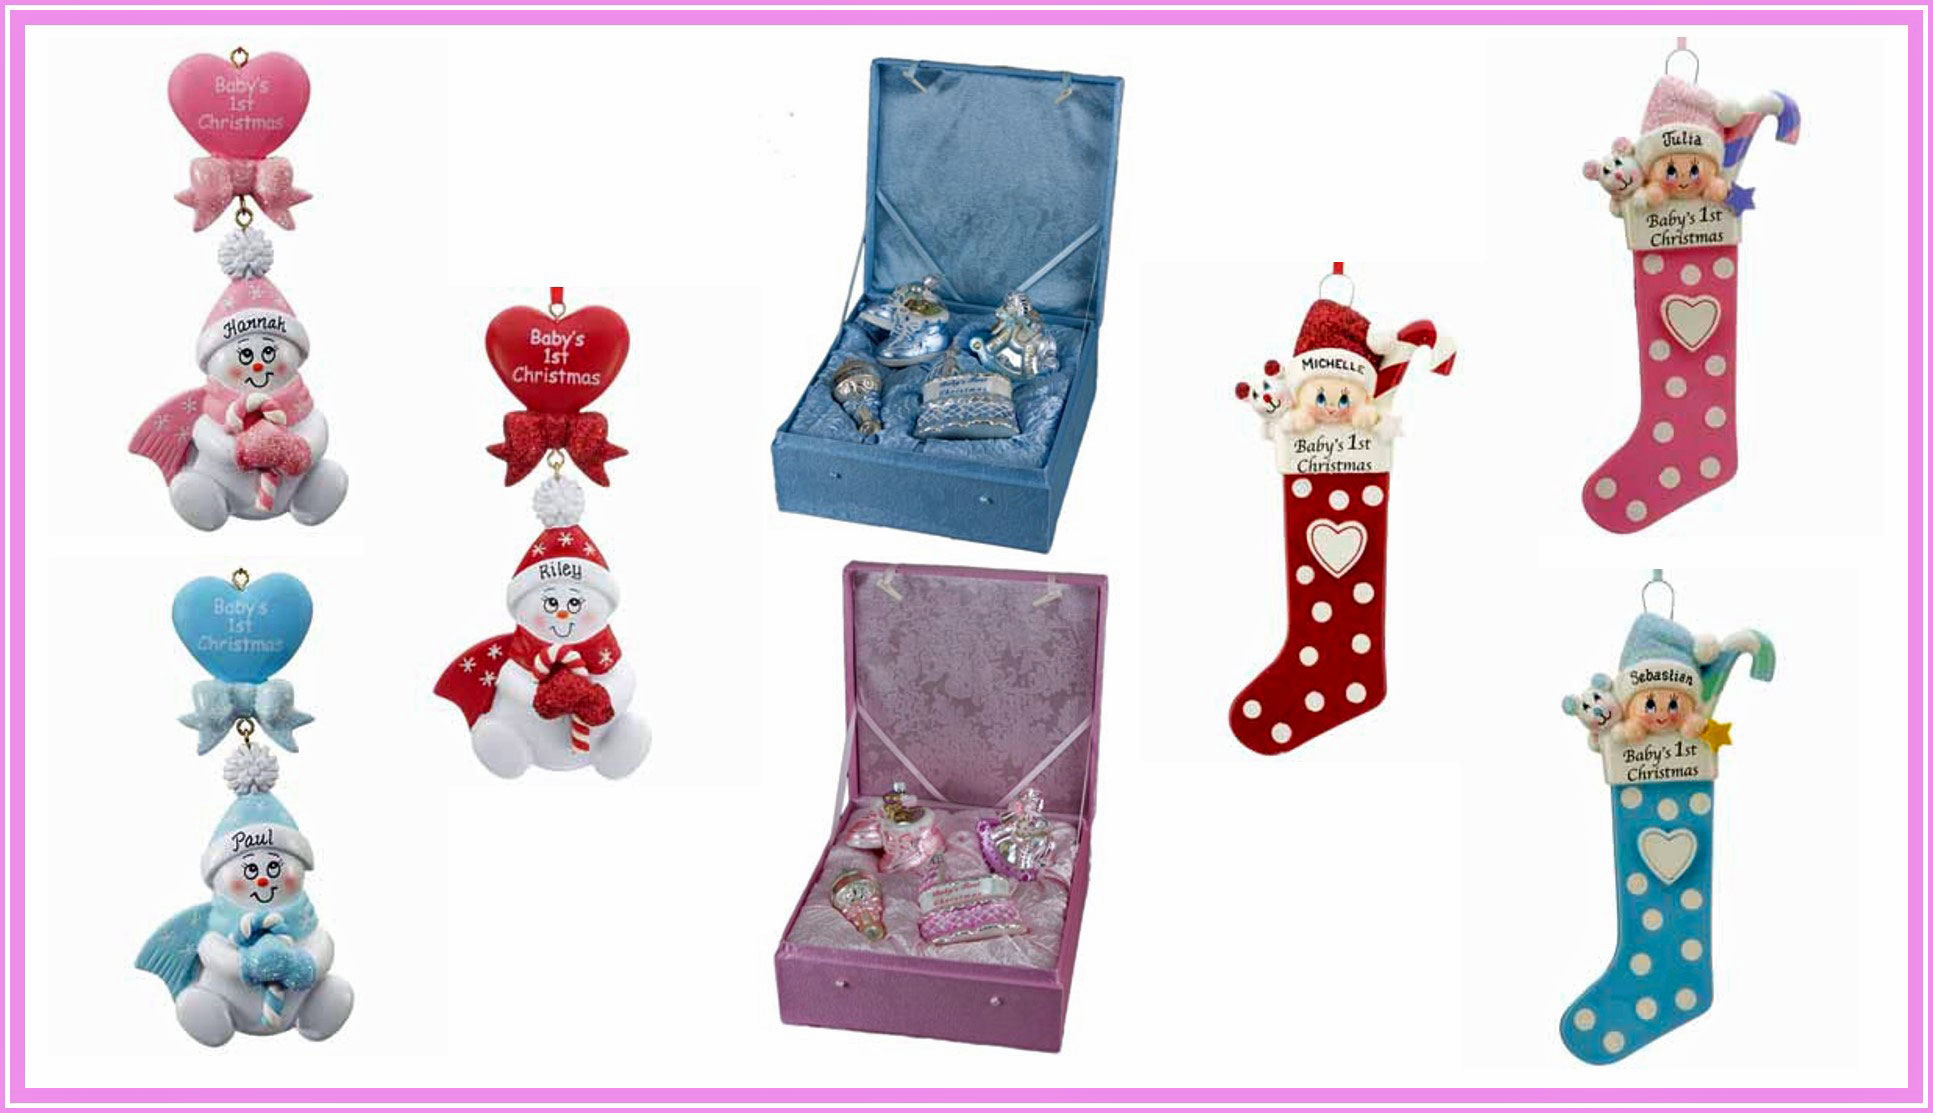 Baby's first Christmas ornaments including gendered ornament sets, stockings and snowbabies. | OrnamentShop.com